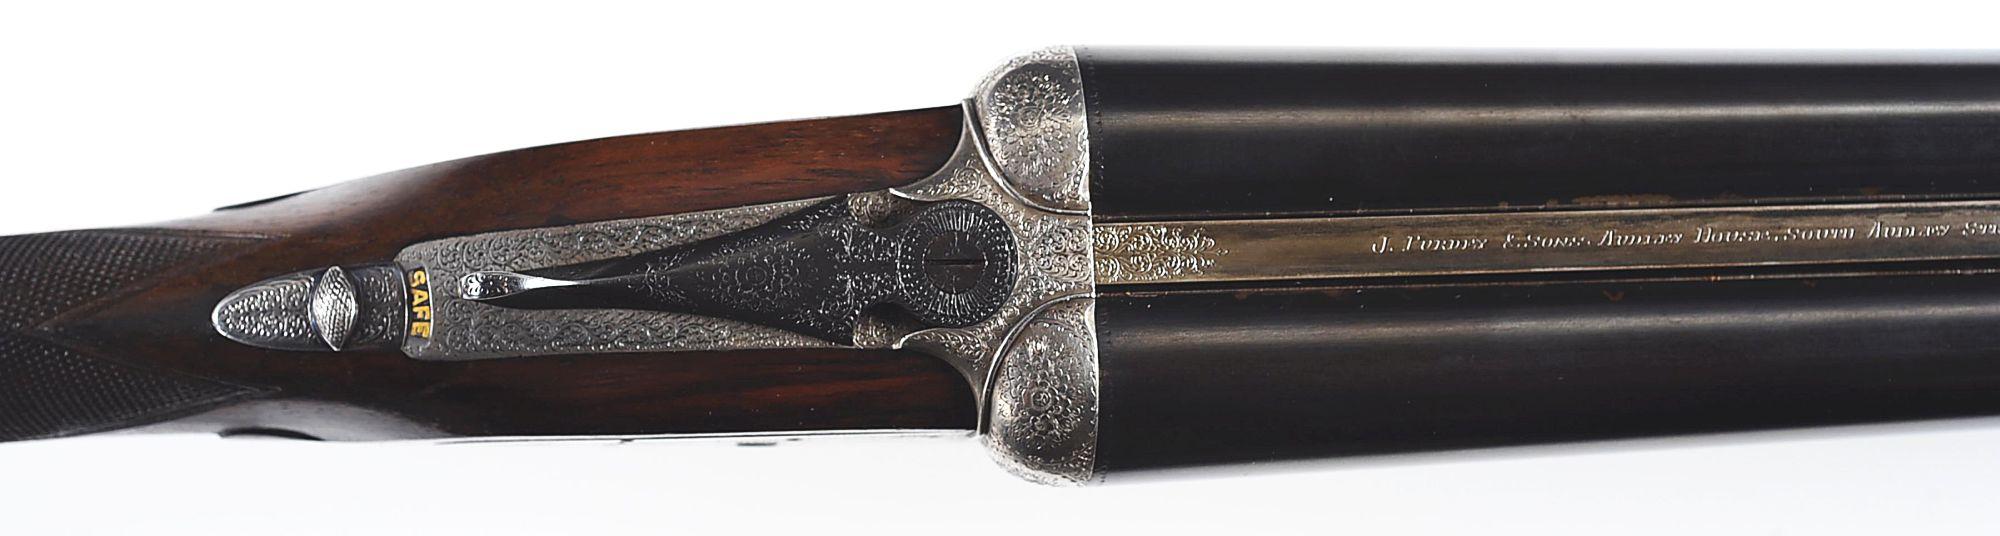 (C) A VERY GOOD GOLDEN AGE PURDEY BEST QUALITY SLE 12 BORE SIDE BY SIDE SHOTGUN.